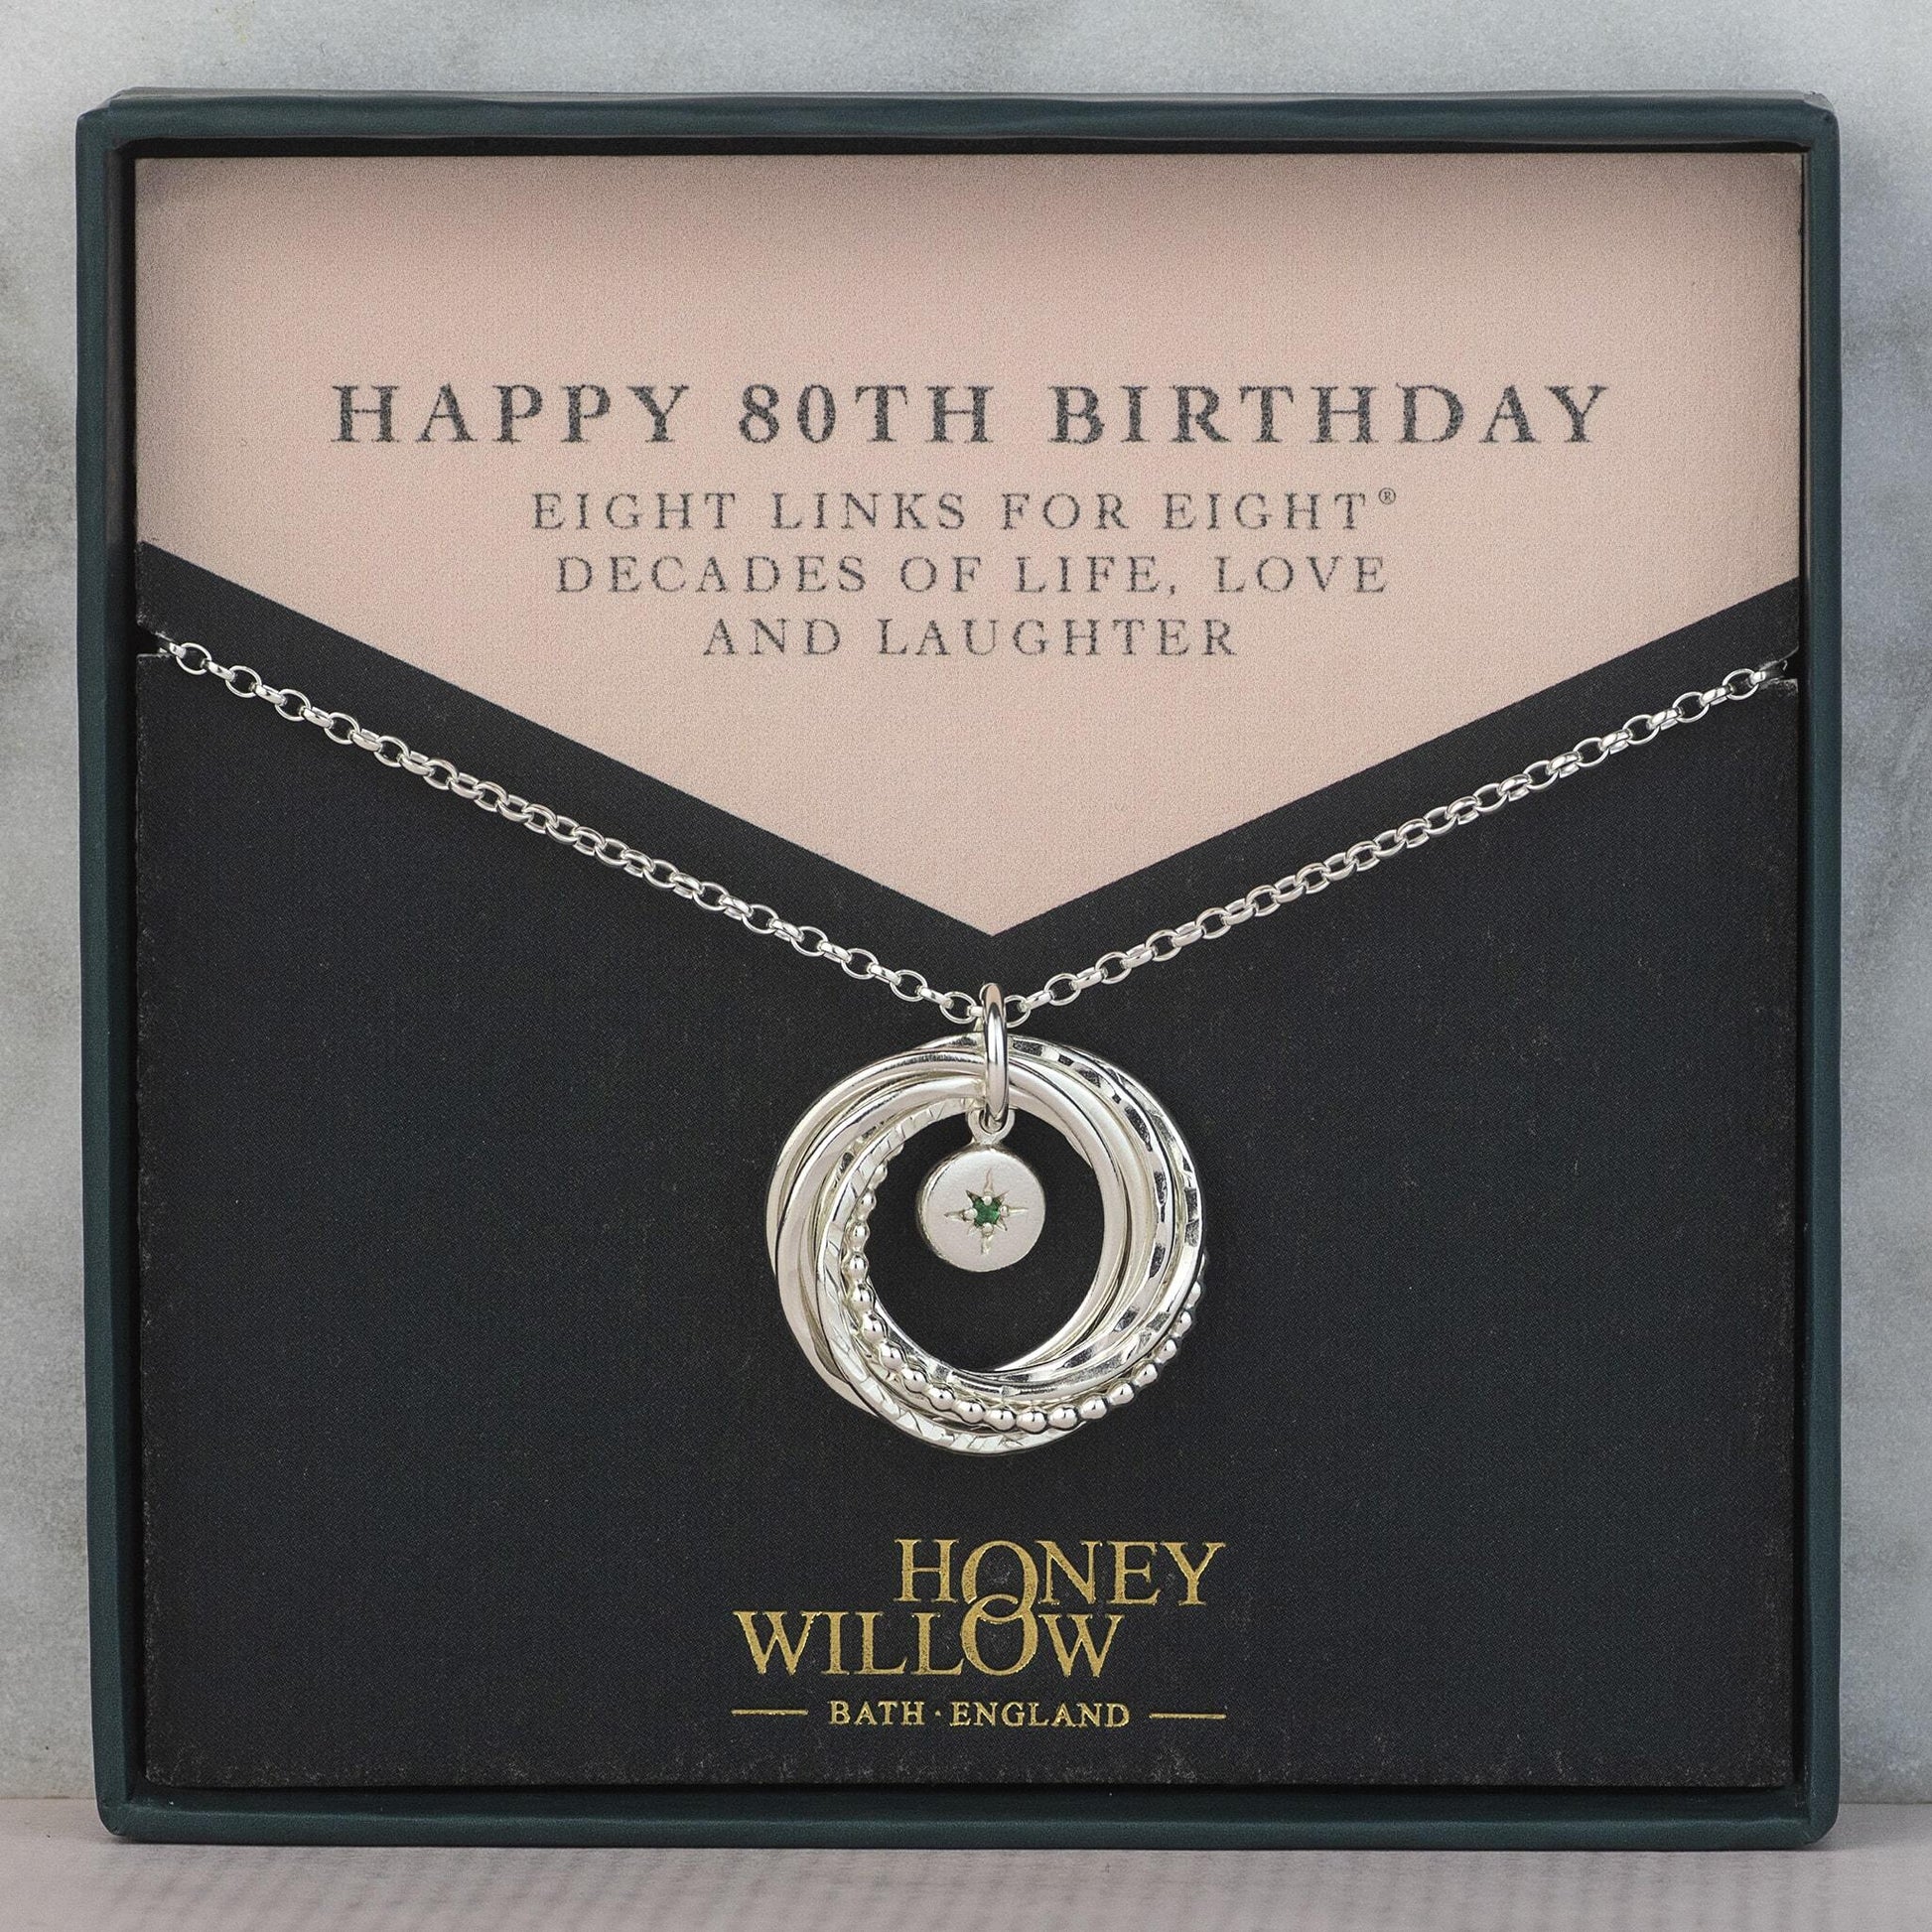 80th Birthday Birthstone Necklace - The Original 8 Links for 8 Decades Necklace - Silver